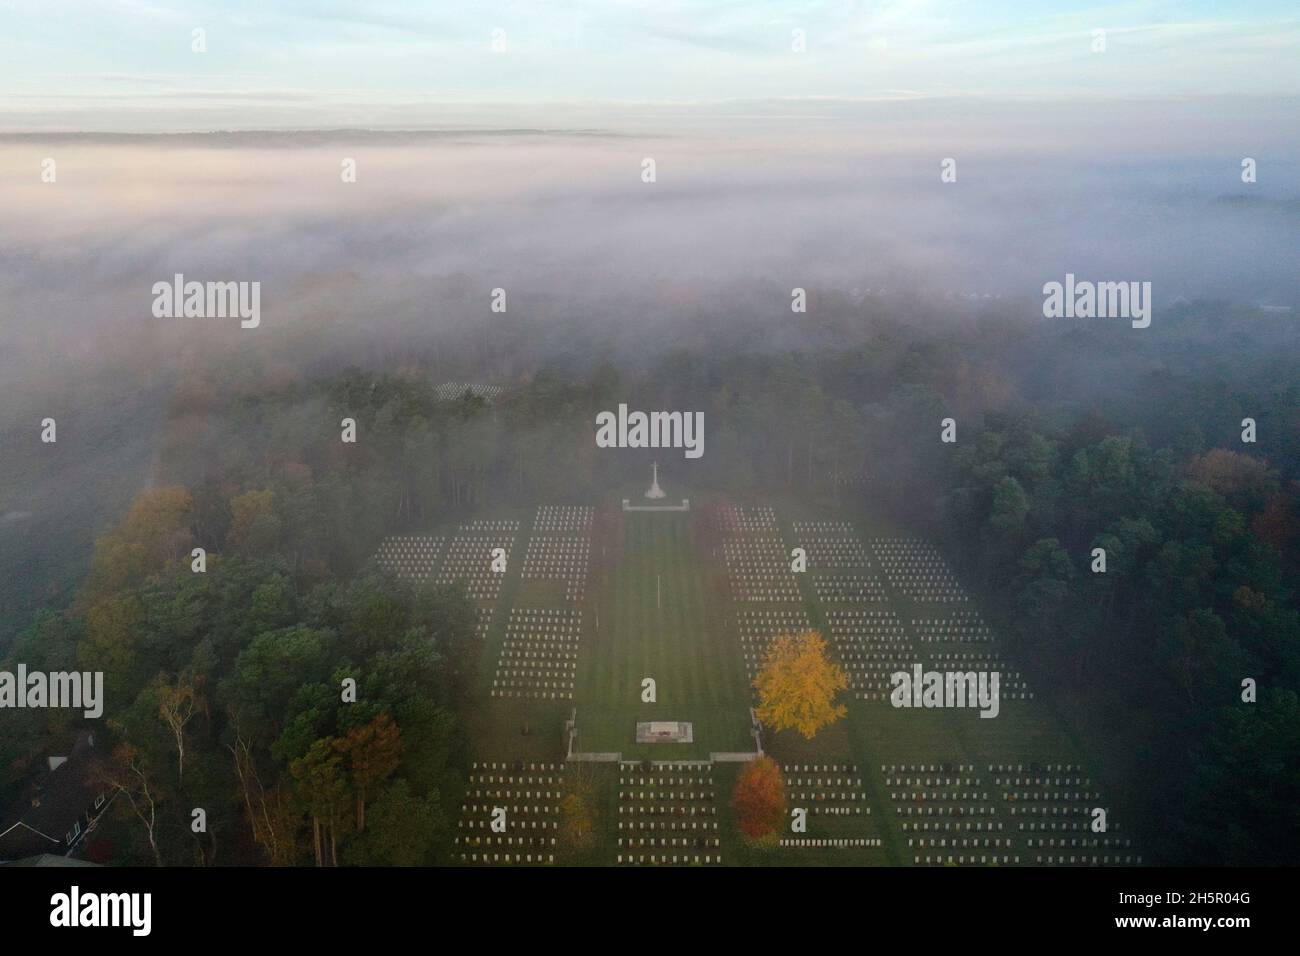 The early morning mist on Armistice Day over First and Second World War graves at the Commonwealth War Graves Commission's Brookwood Military Cemetery in Woking Surrey. People across the UK will observe a two minute silence at 11 o'clock to remember the war dead. Picture date: Thursday November 11, 2021. Stock Photo